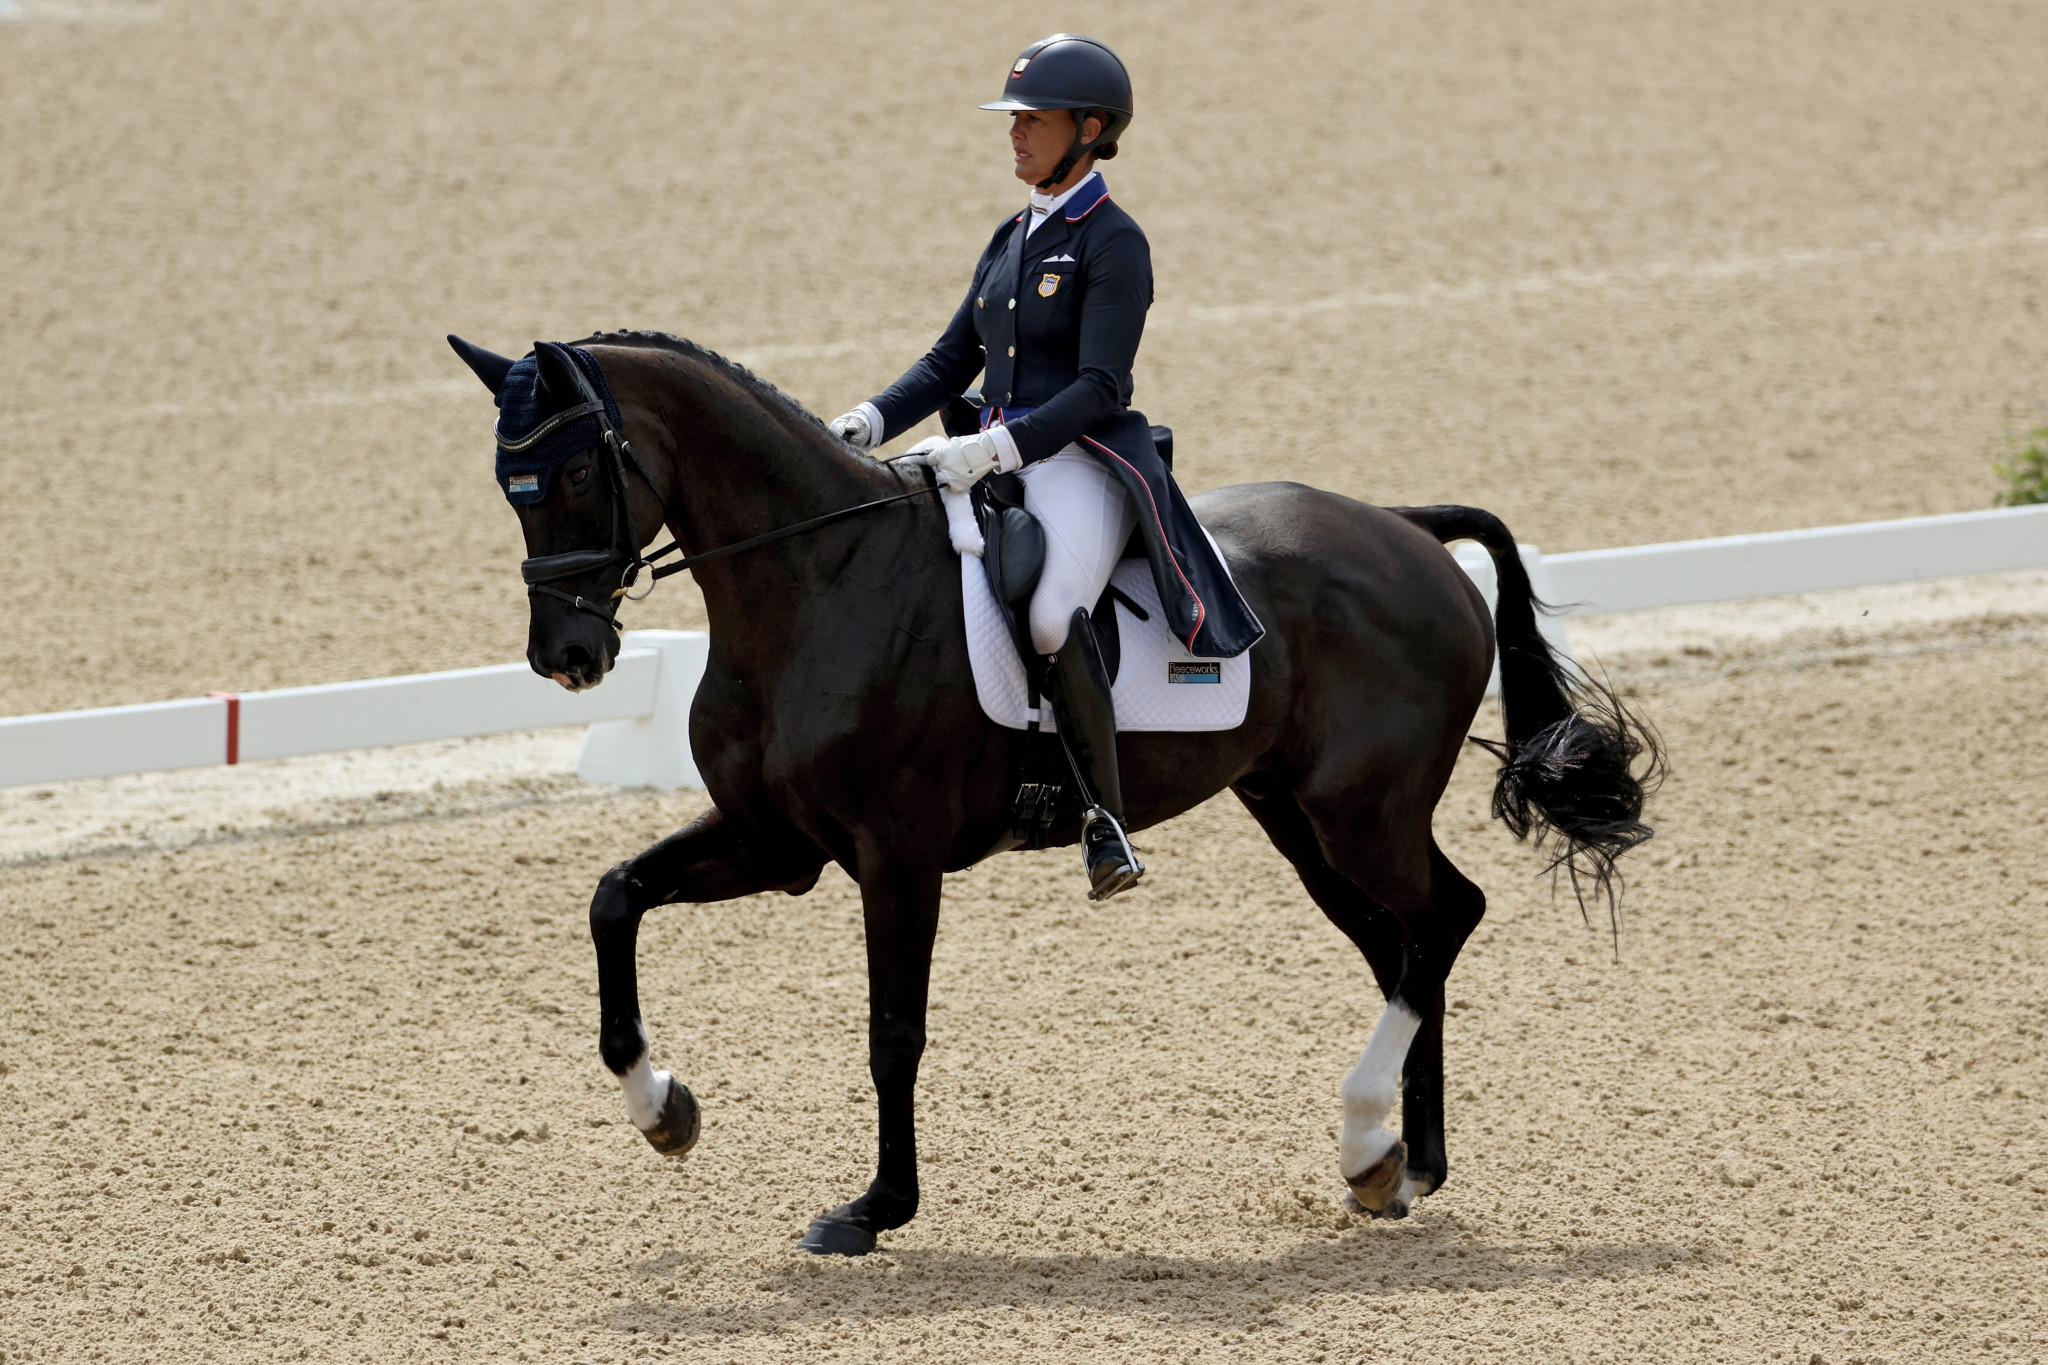 Smith dazzles in dressage to close gap on Little at Kentucky Three-Day Event